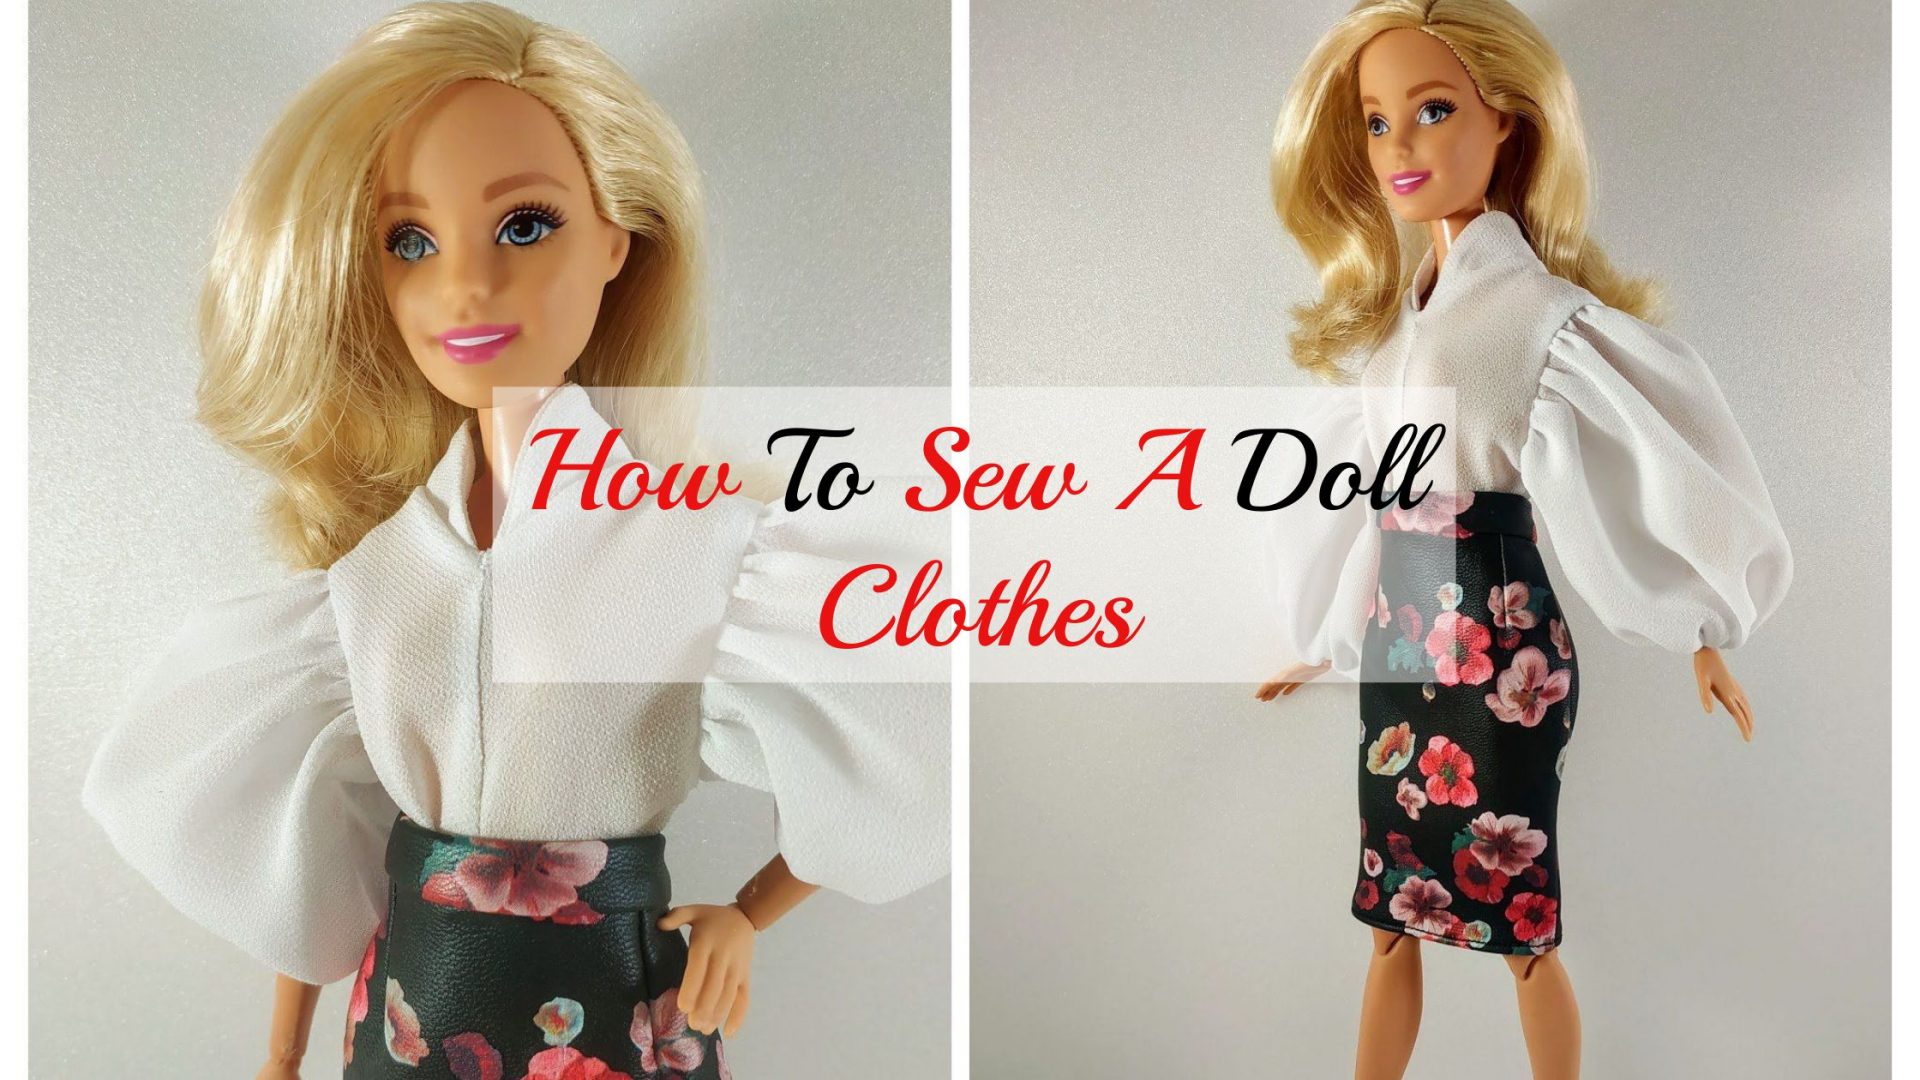 How To Sew A Doll Clothes